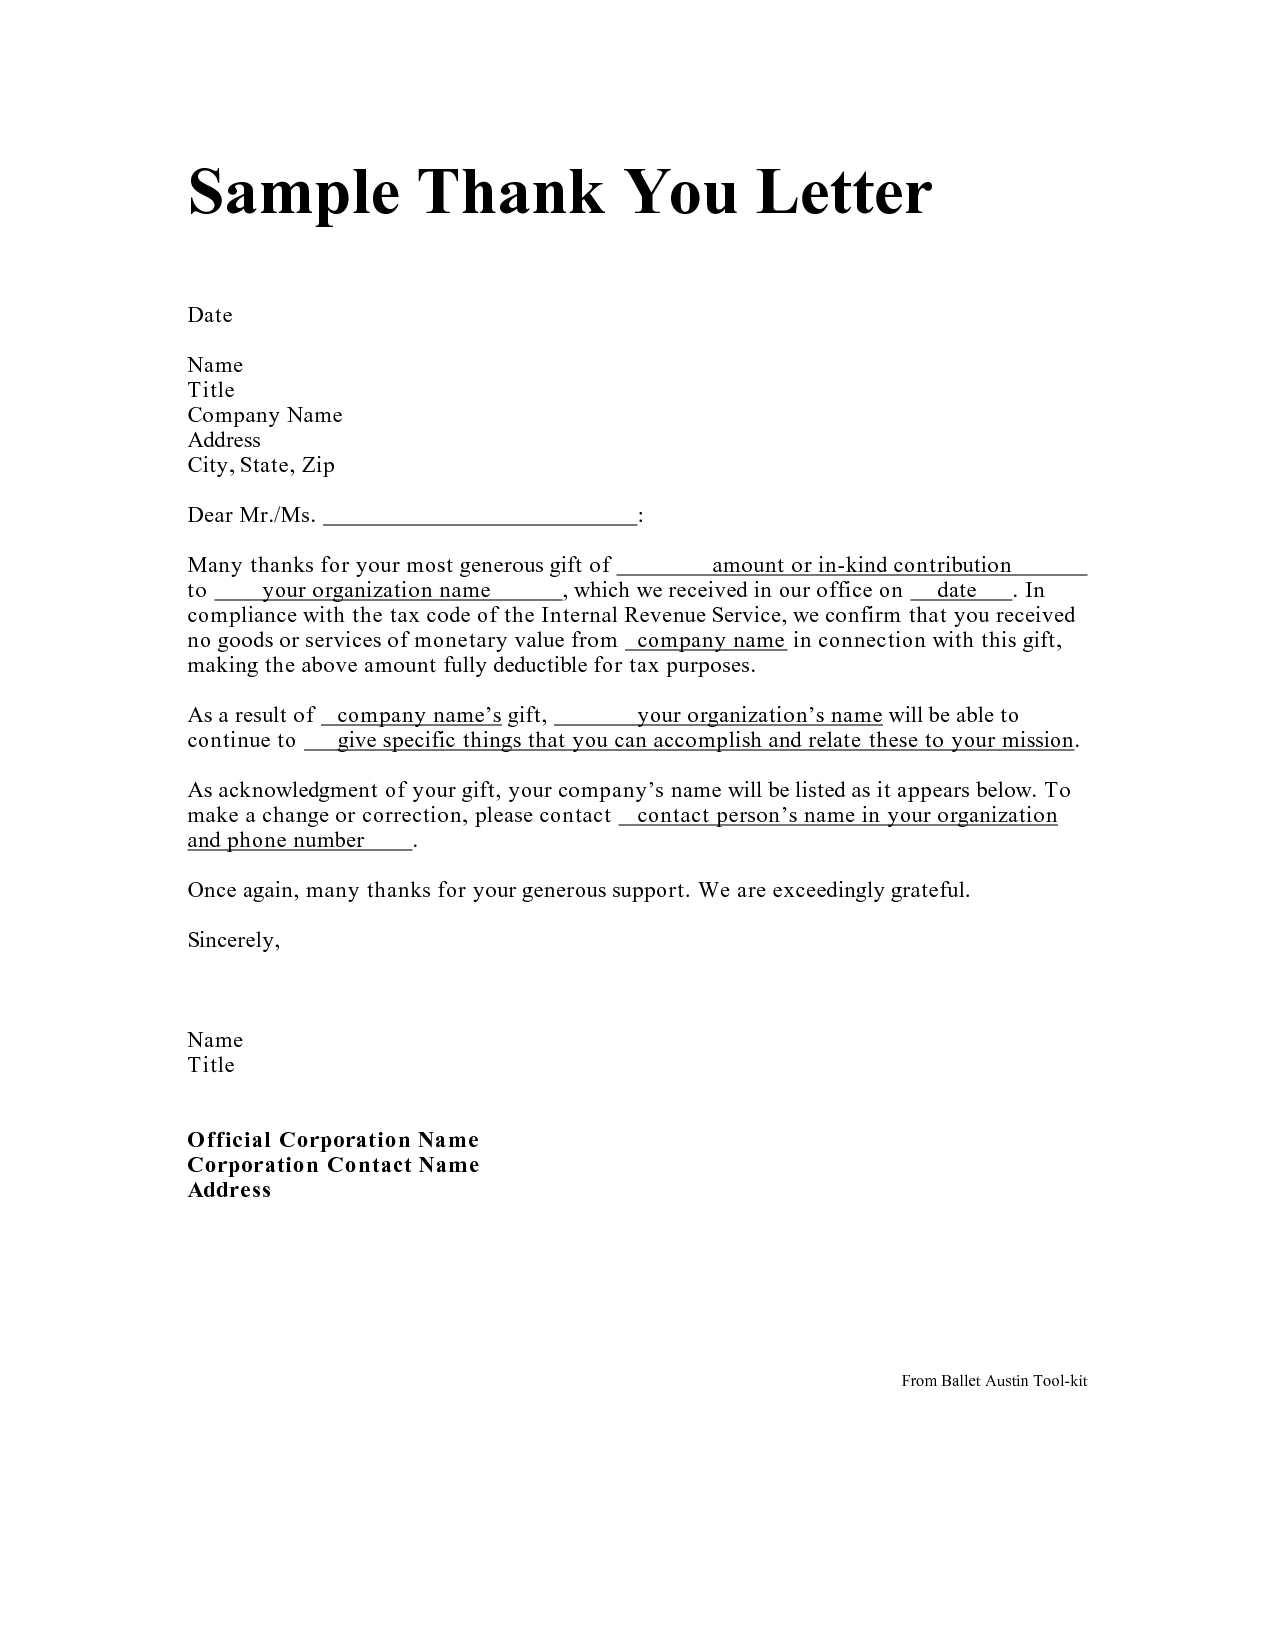 Goodwill Letter Template to Remove Paid Collections Collection Letter